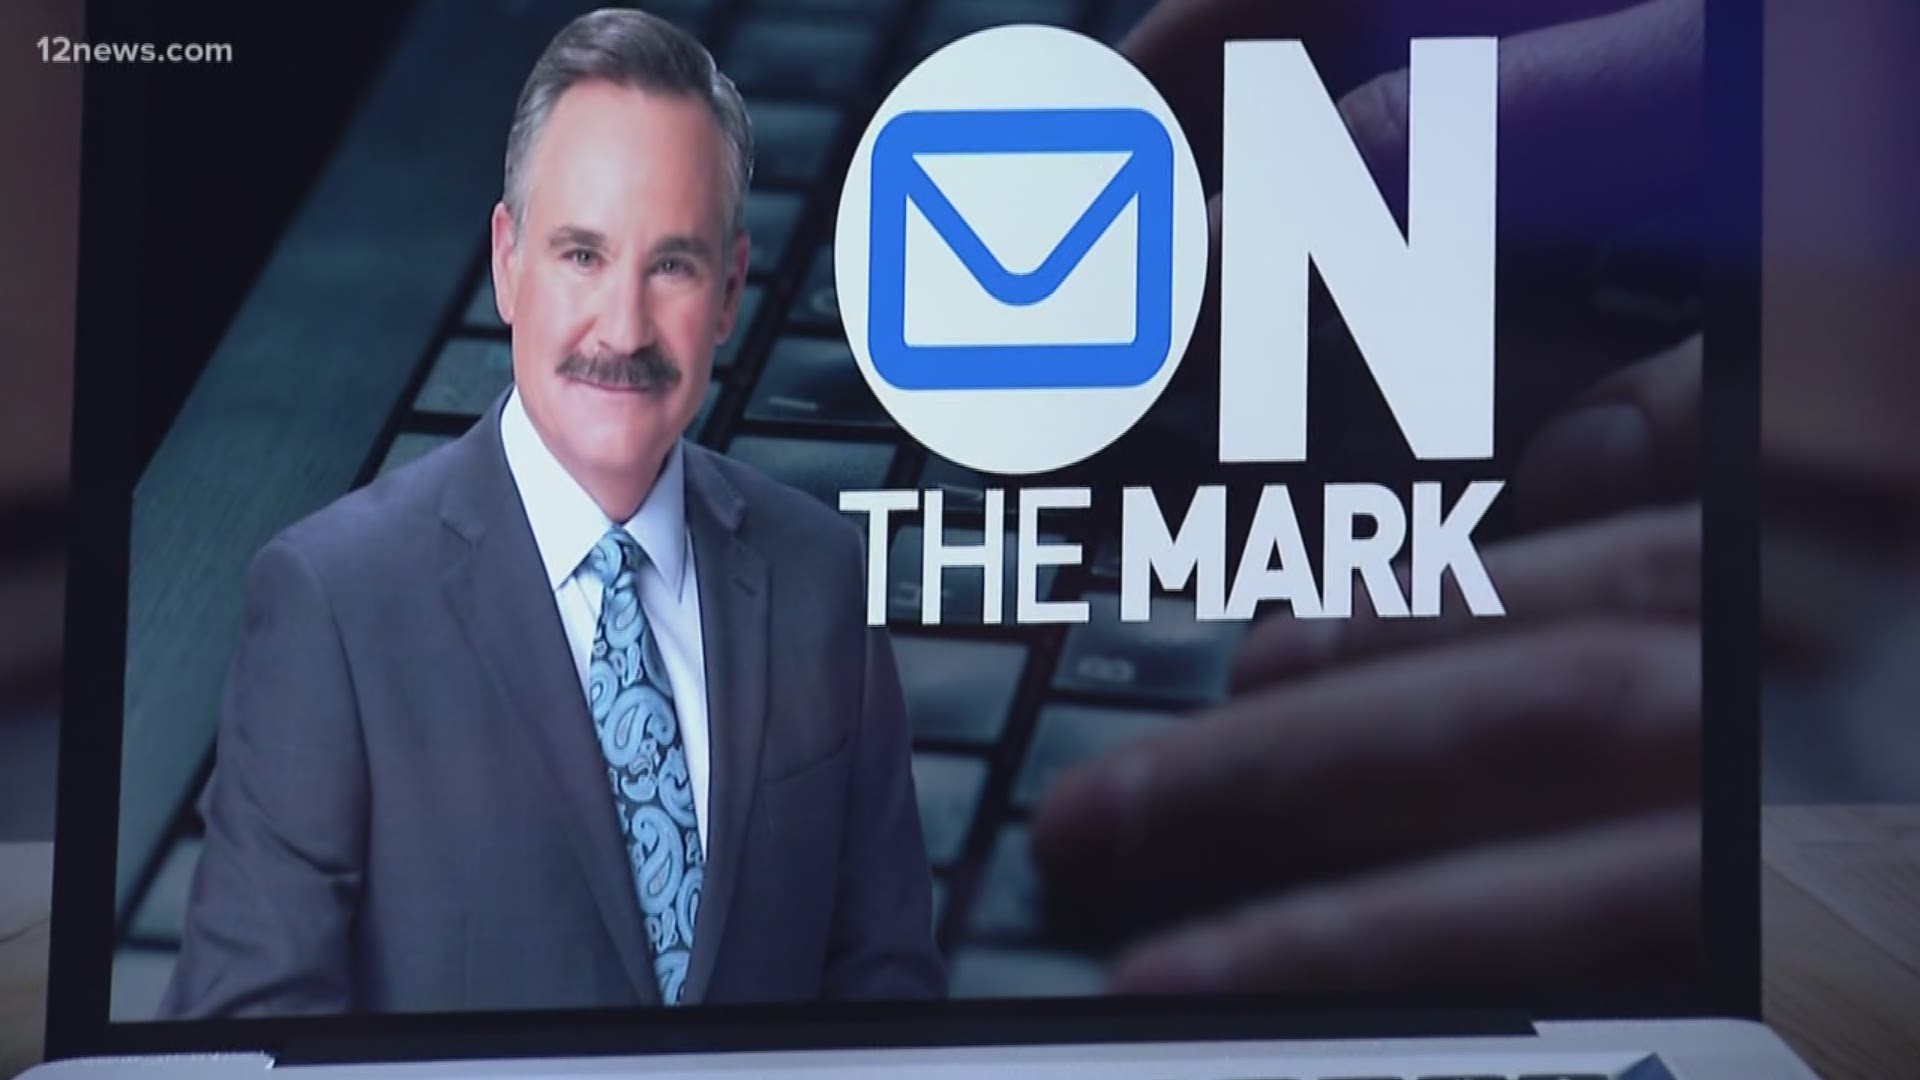 As the issue of vaping takes center stage, Mark Curtis reminds us not to forget about the importance of addressing the issue of gun violence in the U.S. Here's this week's "On the Mark."